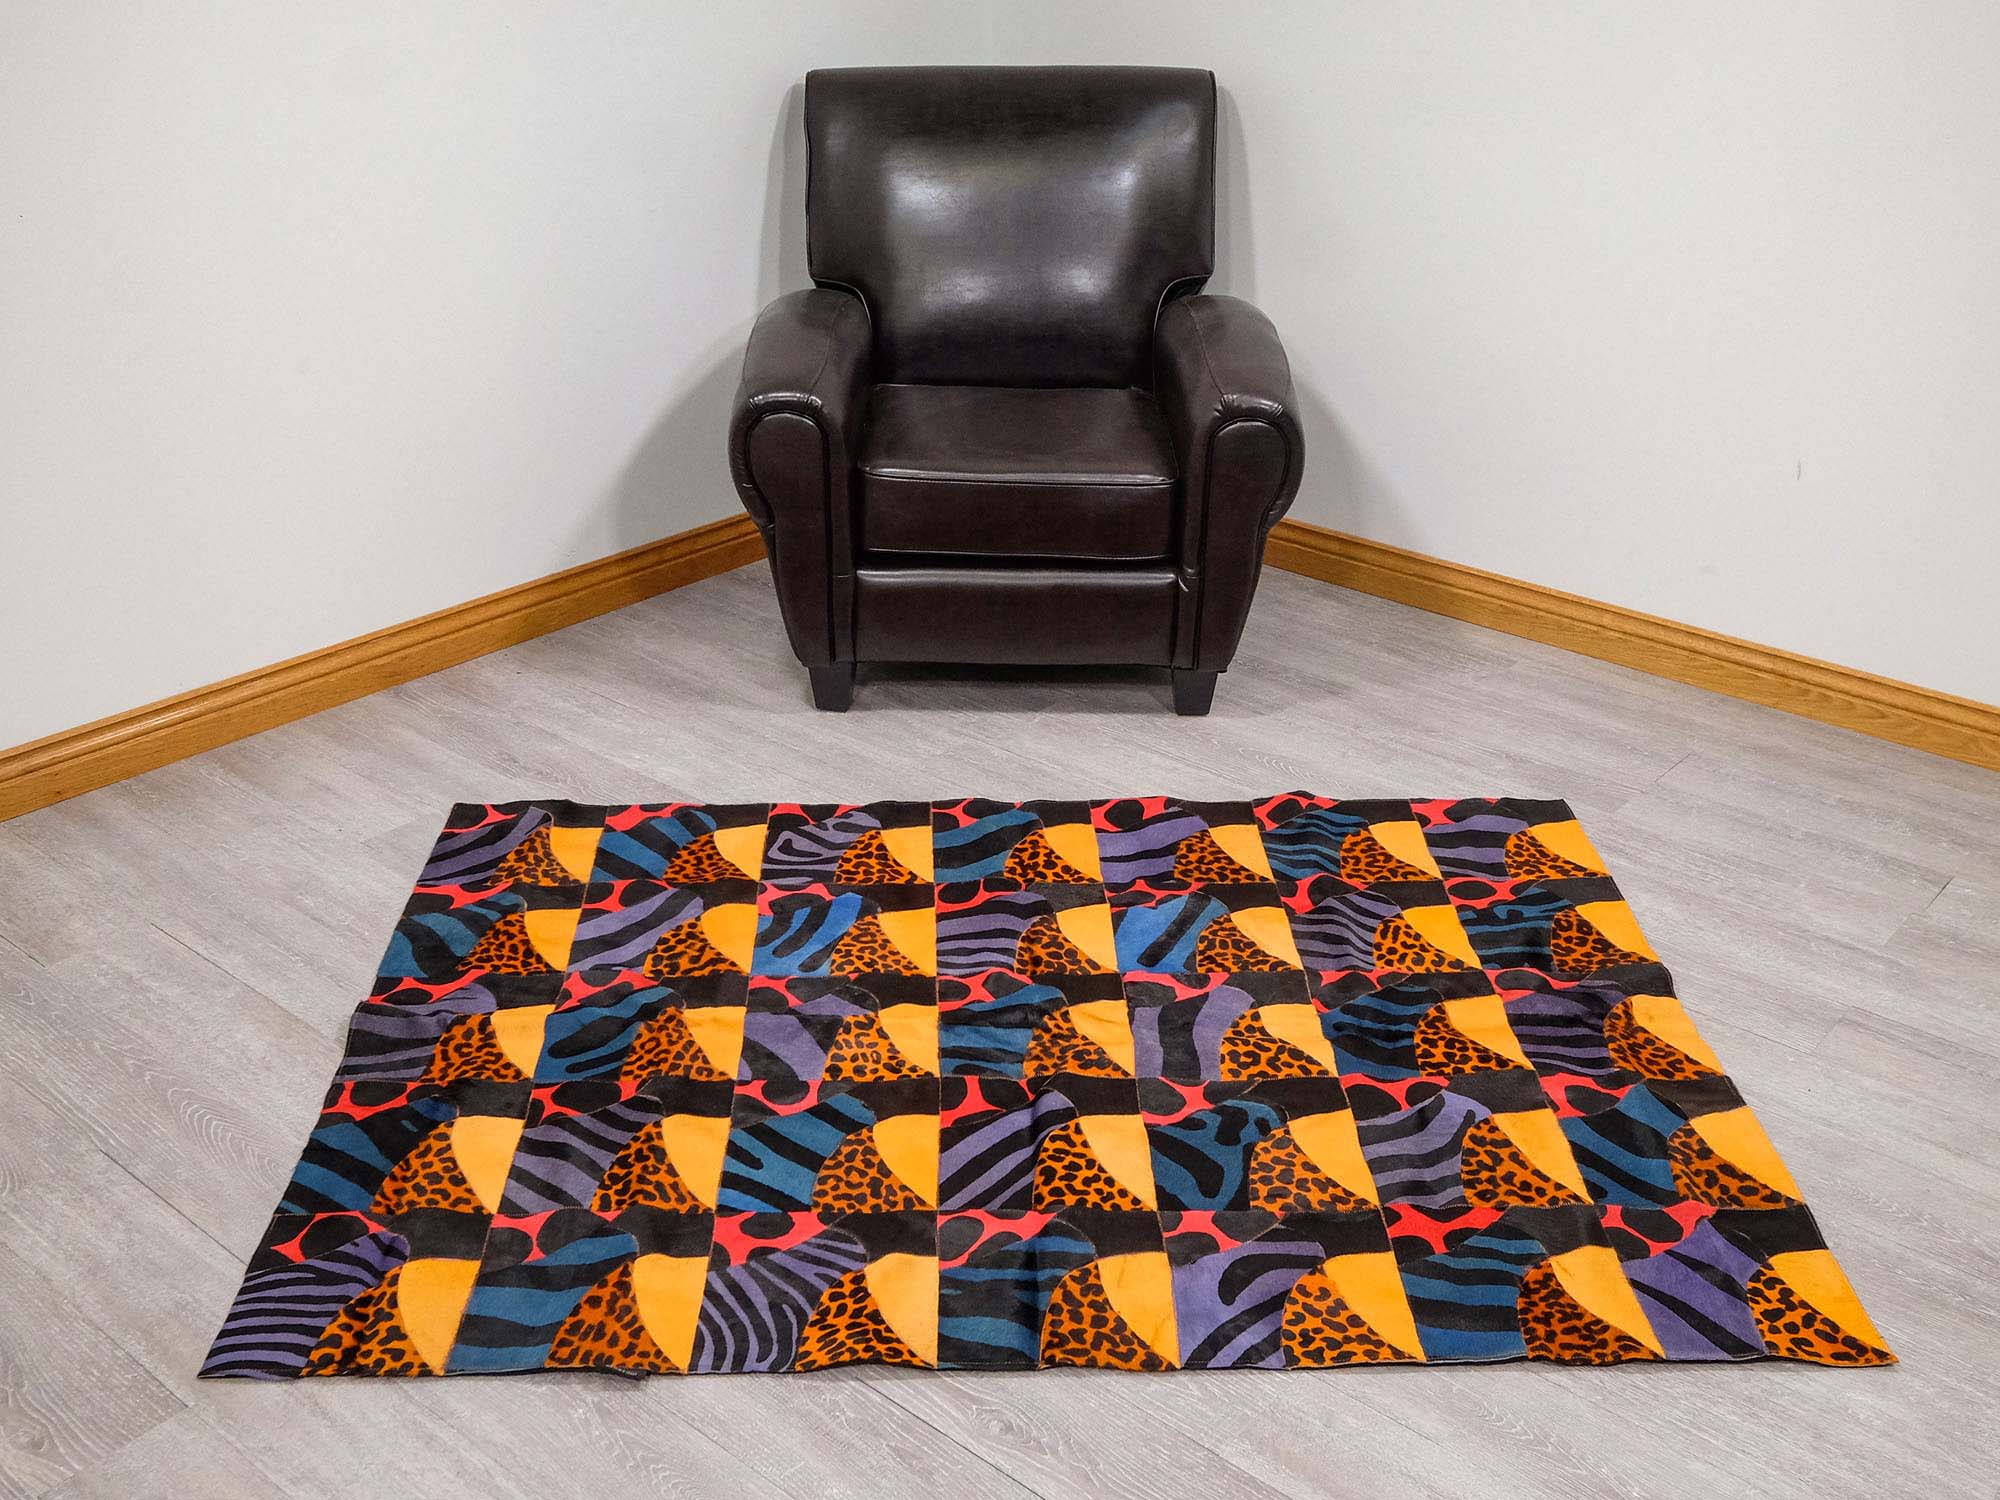 Cow Hide Carpet: Dyed Patchwork: Gallery Item 